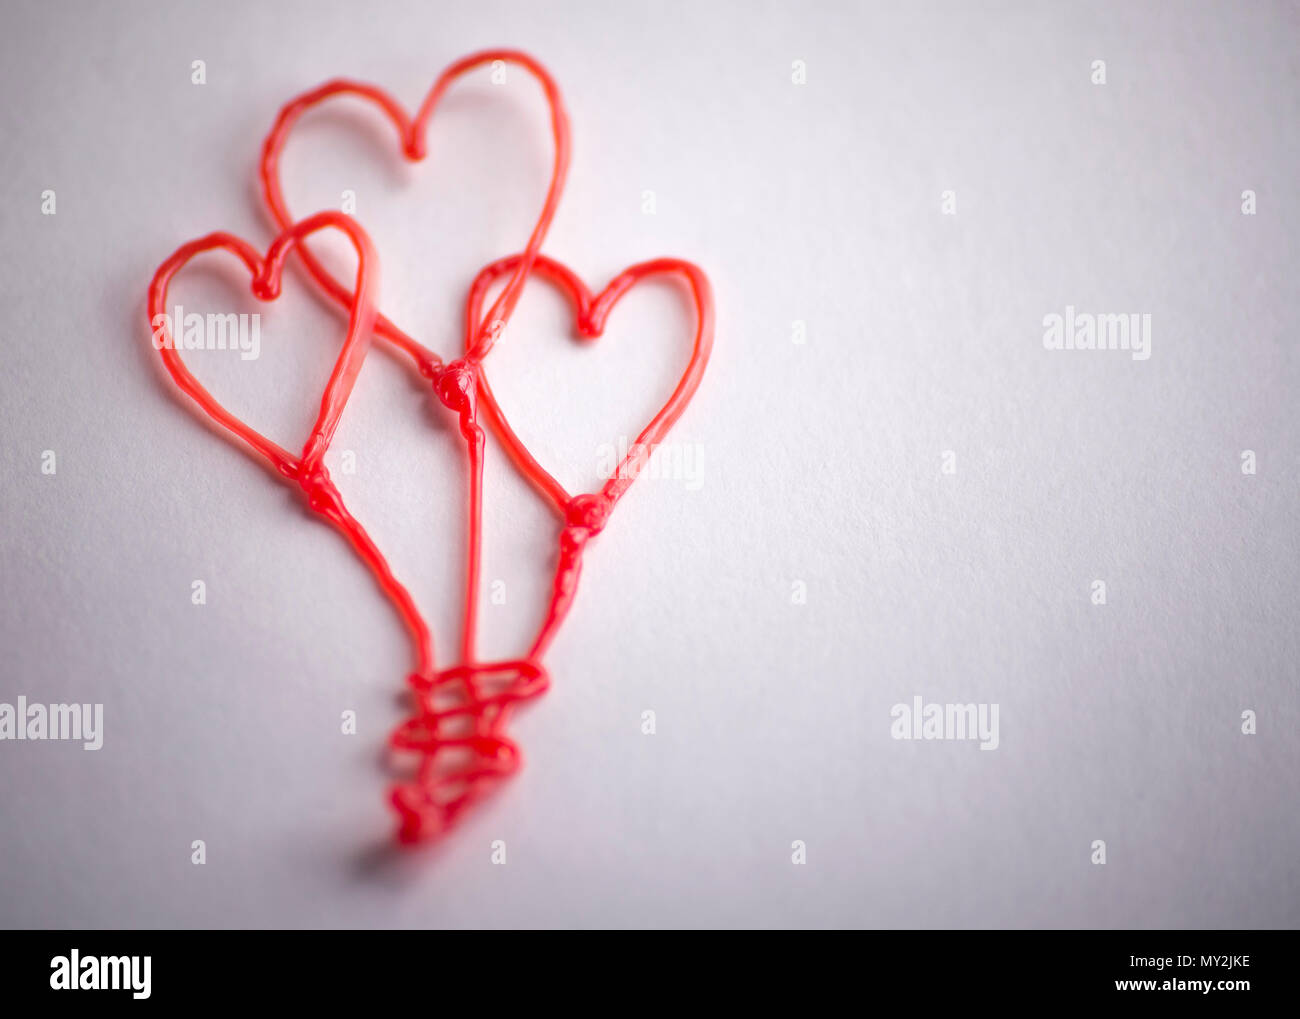 red heart drawn by 3d pen Stock Photo - Alamy